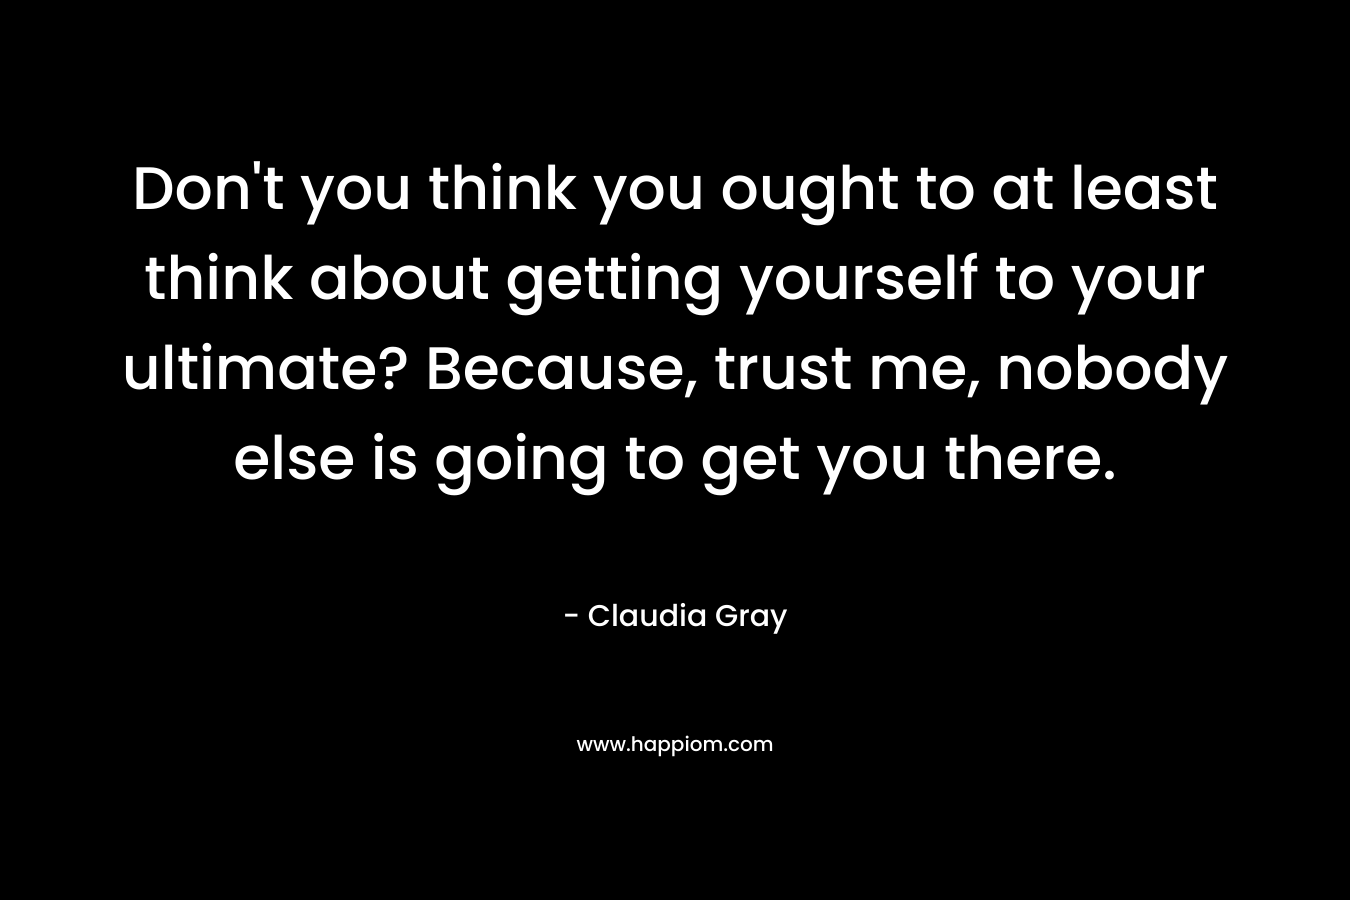 Don’t you think you ought to at least think about getting yourself to your ultimate? Because, trust me, nobody else is going to get you there. – Claudia Gray